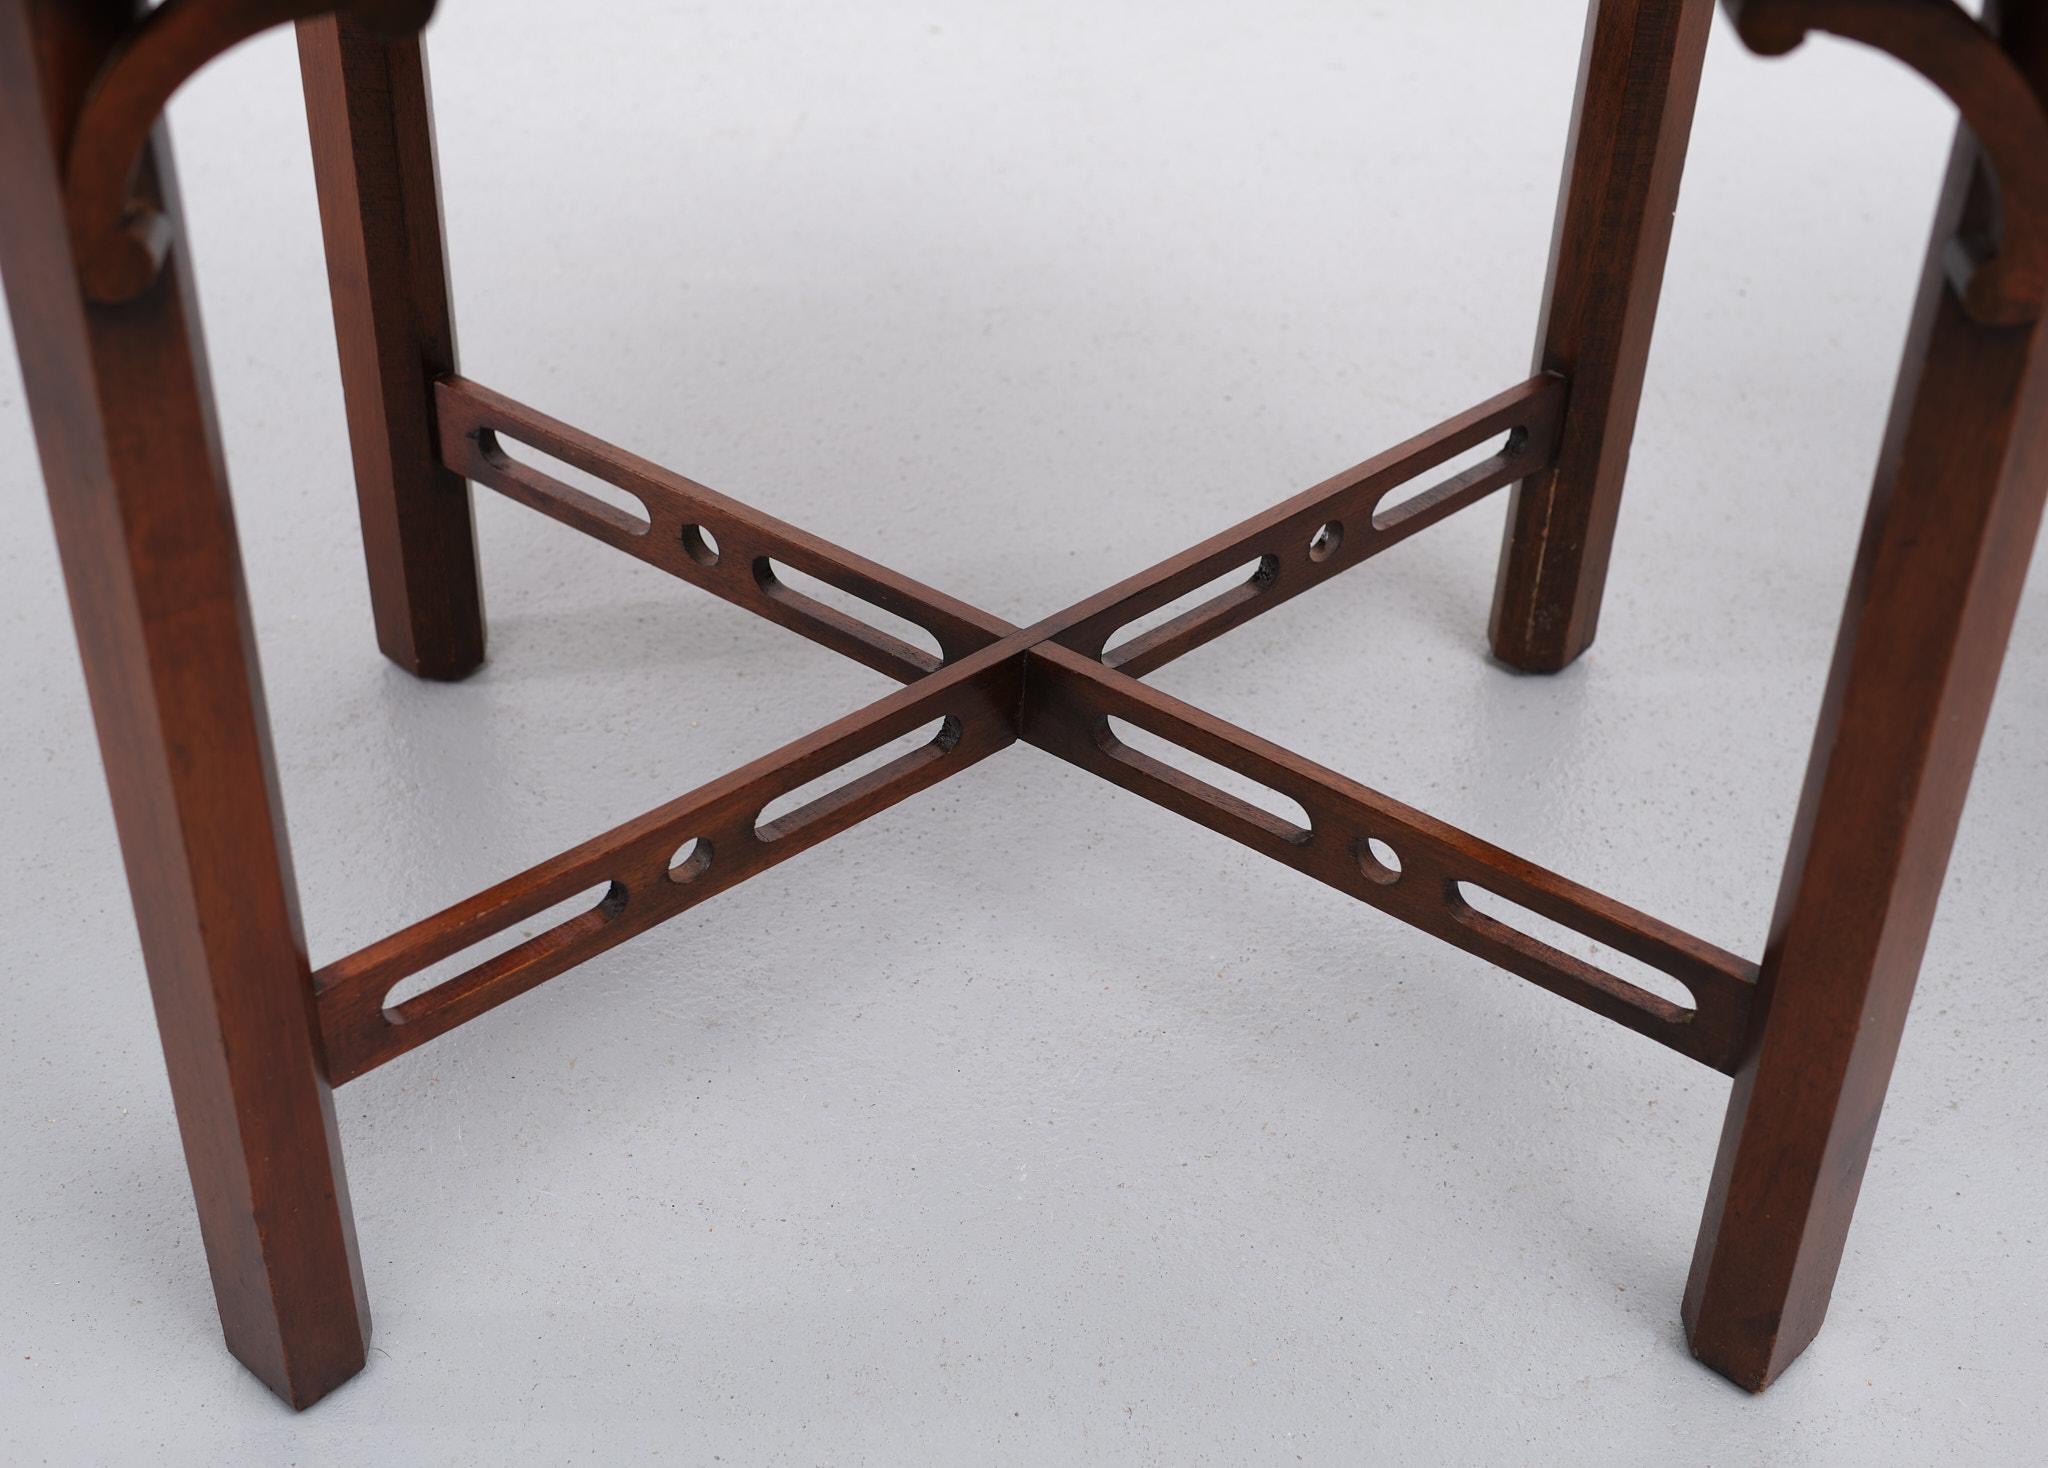 English Bevan Funnell Mahogany Side Tables Georgian Revival England, 1960s For Sale